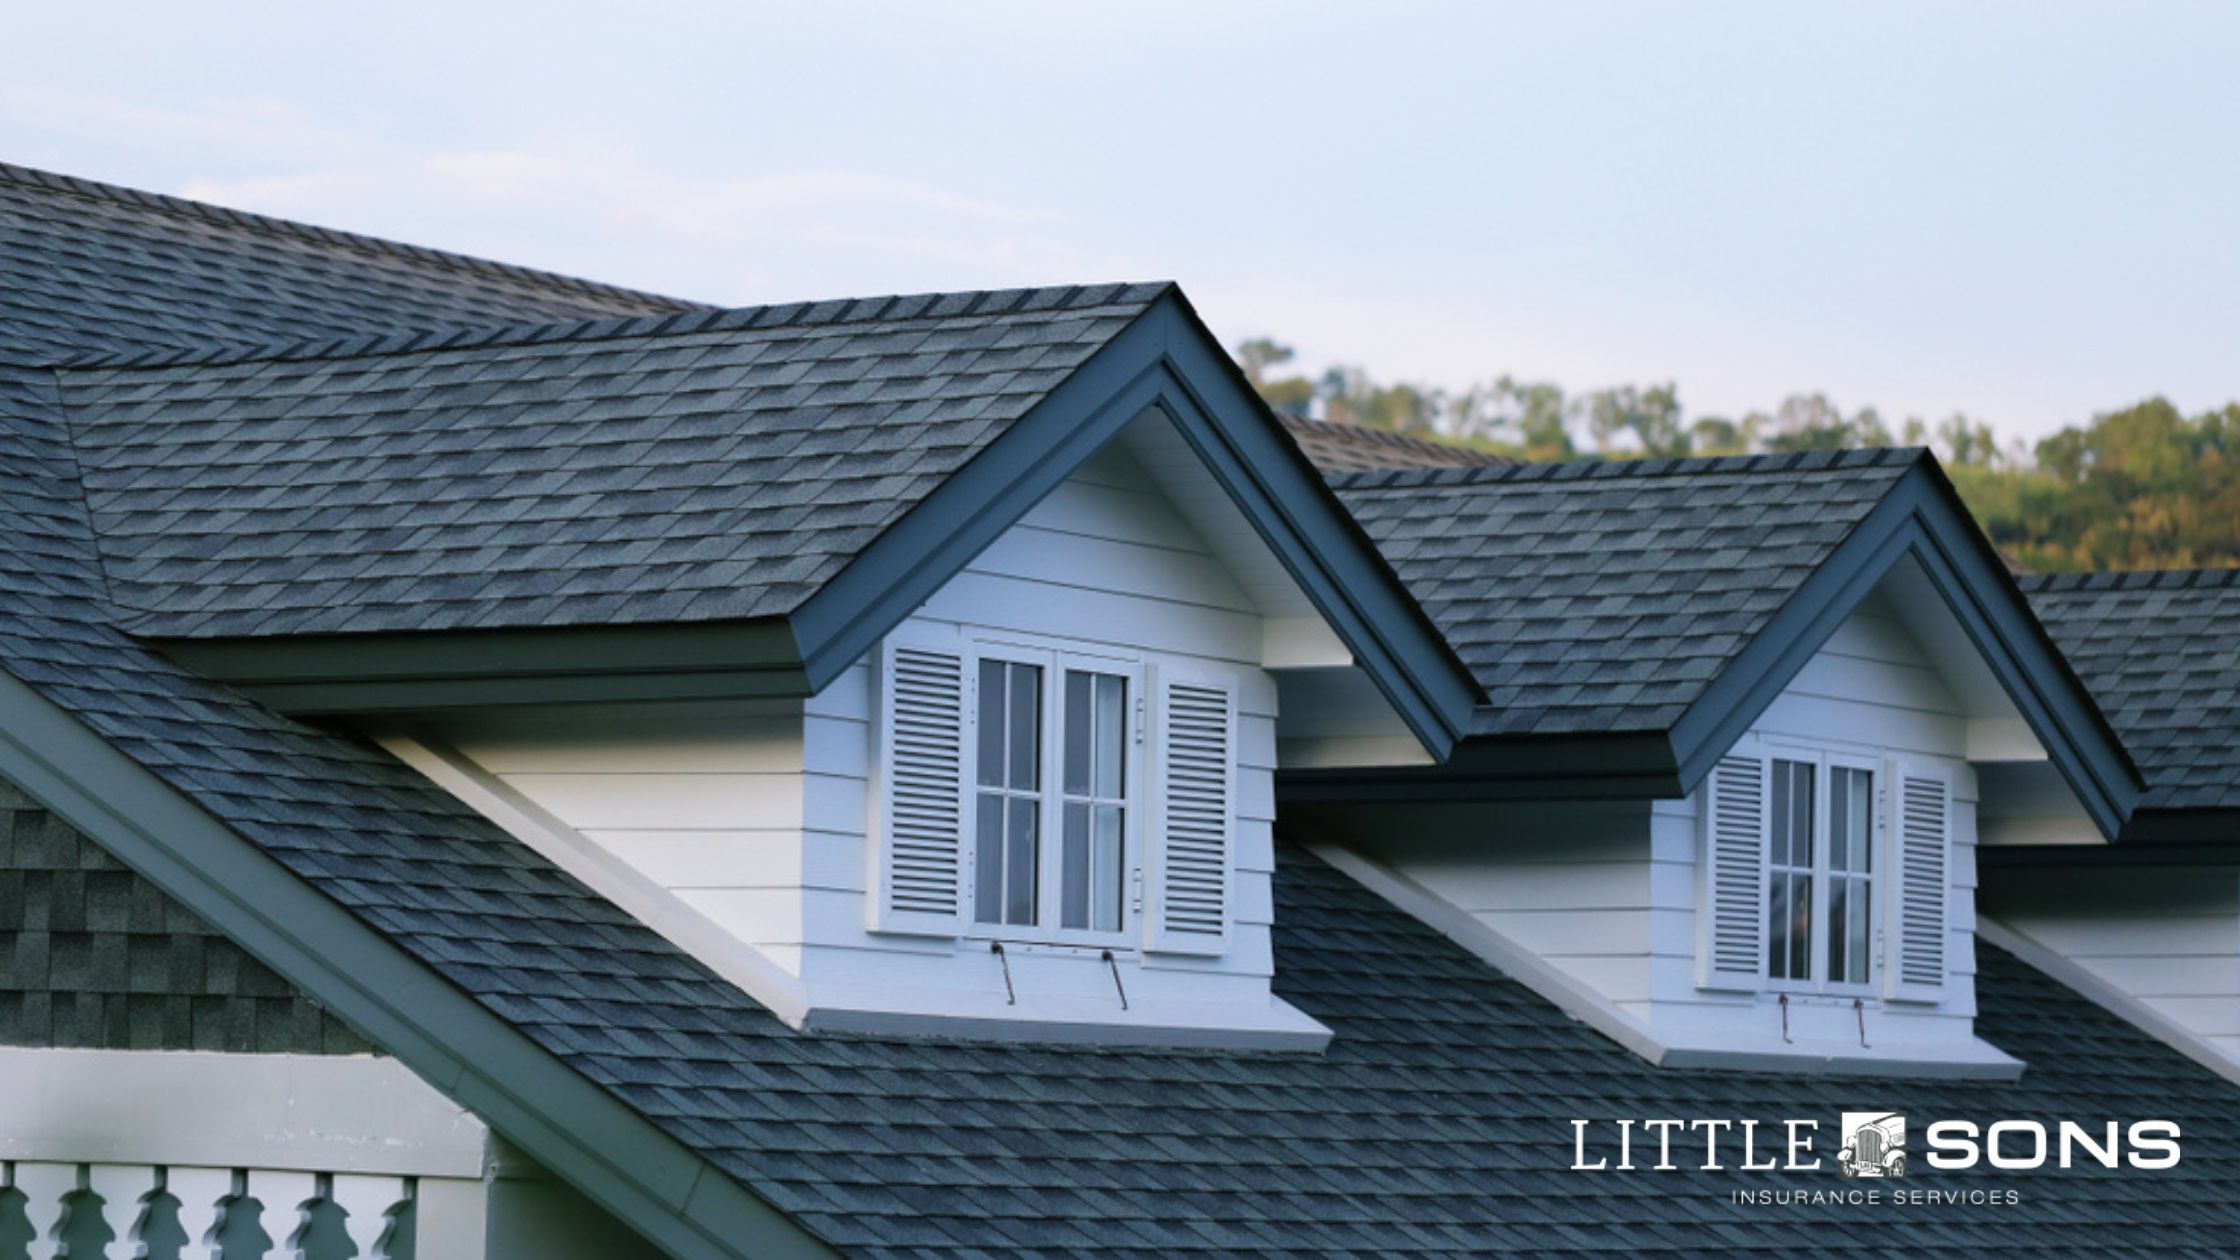 Informative Insights on Roof Requirements for Homeowners Insurance